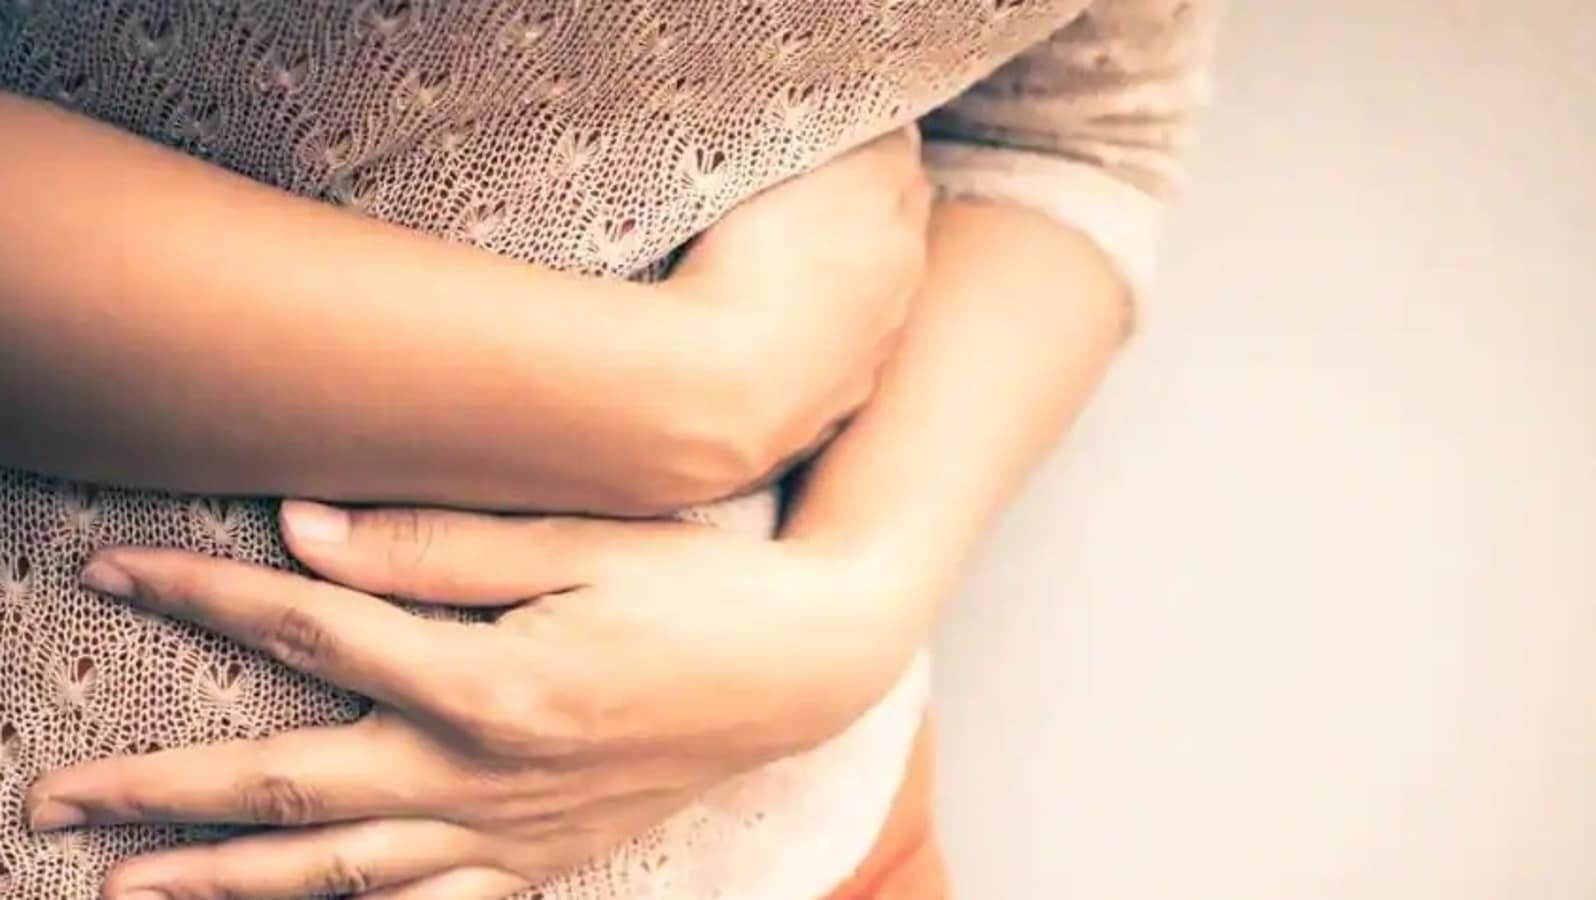 Ayurveda tips: Feeling bloated? Home remedies to your rescue